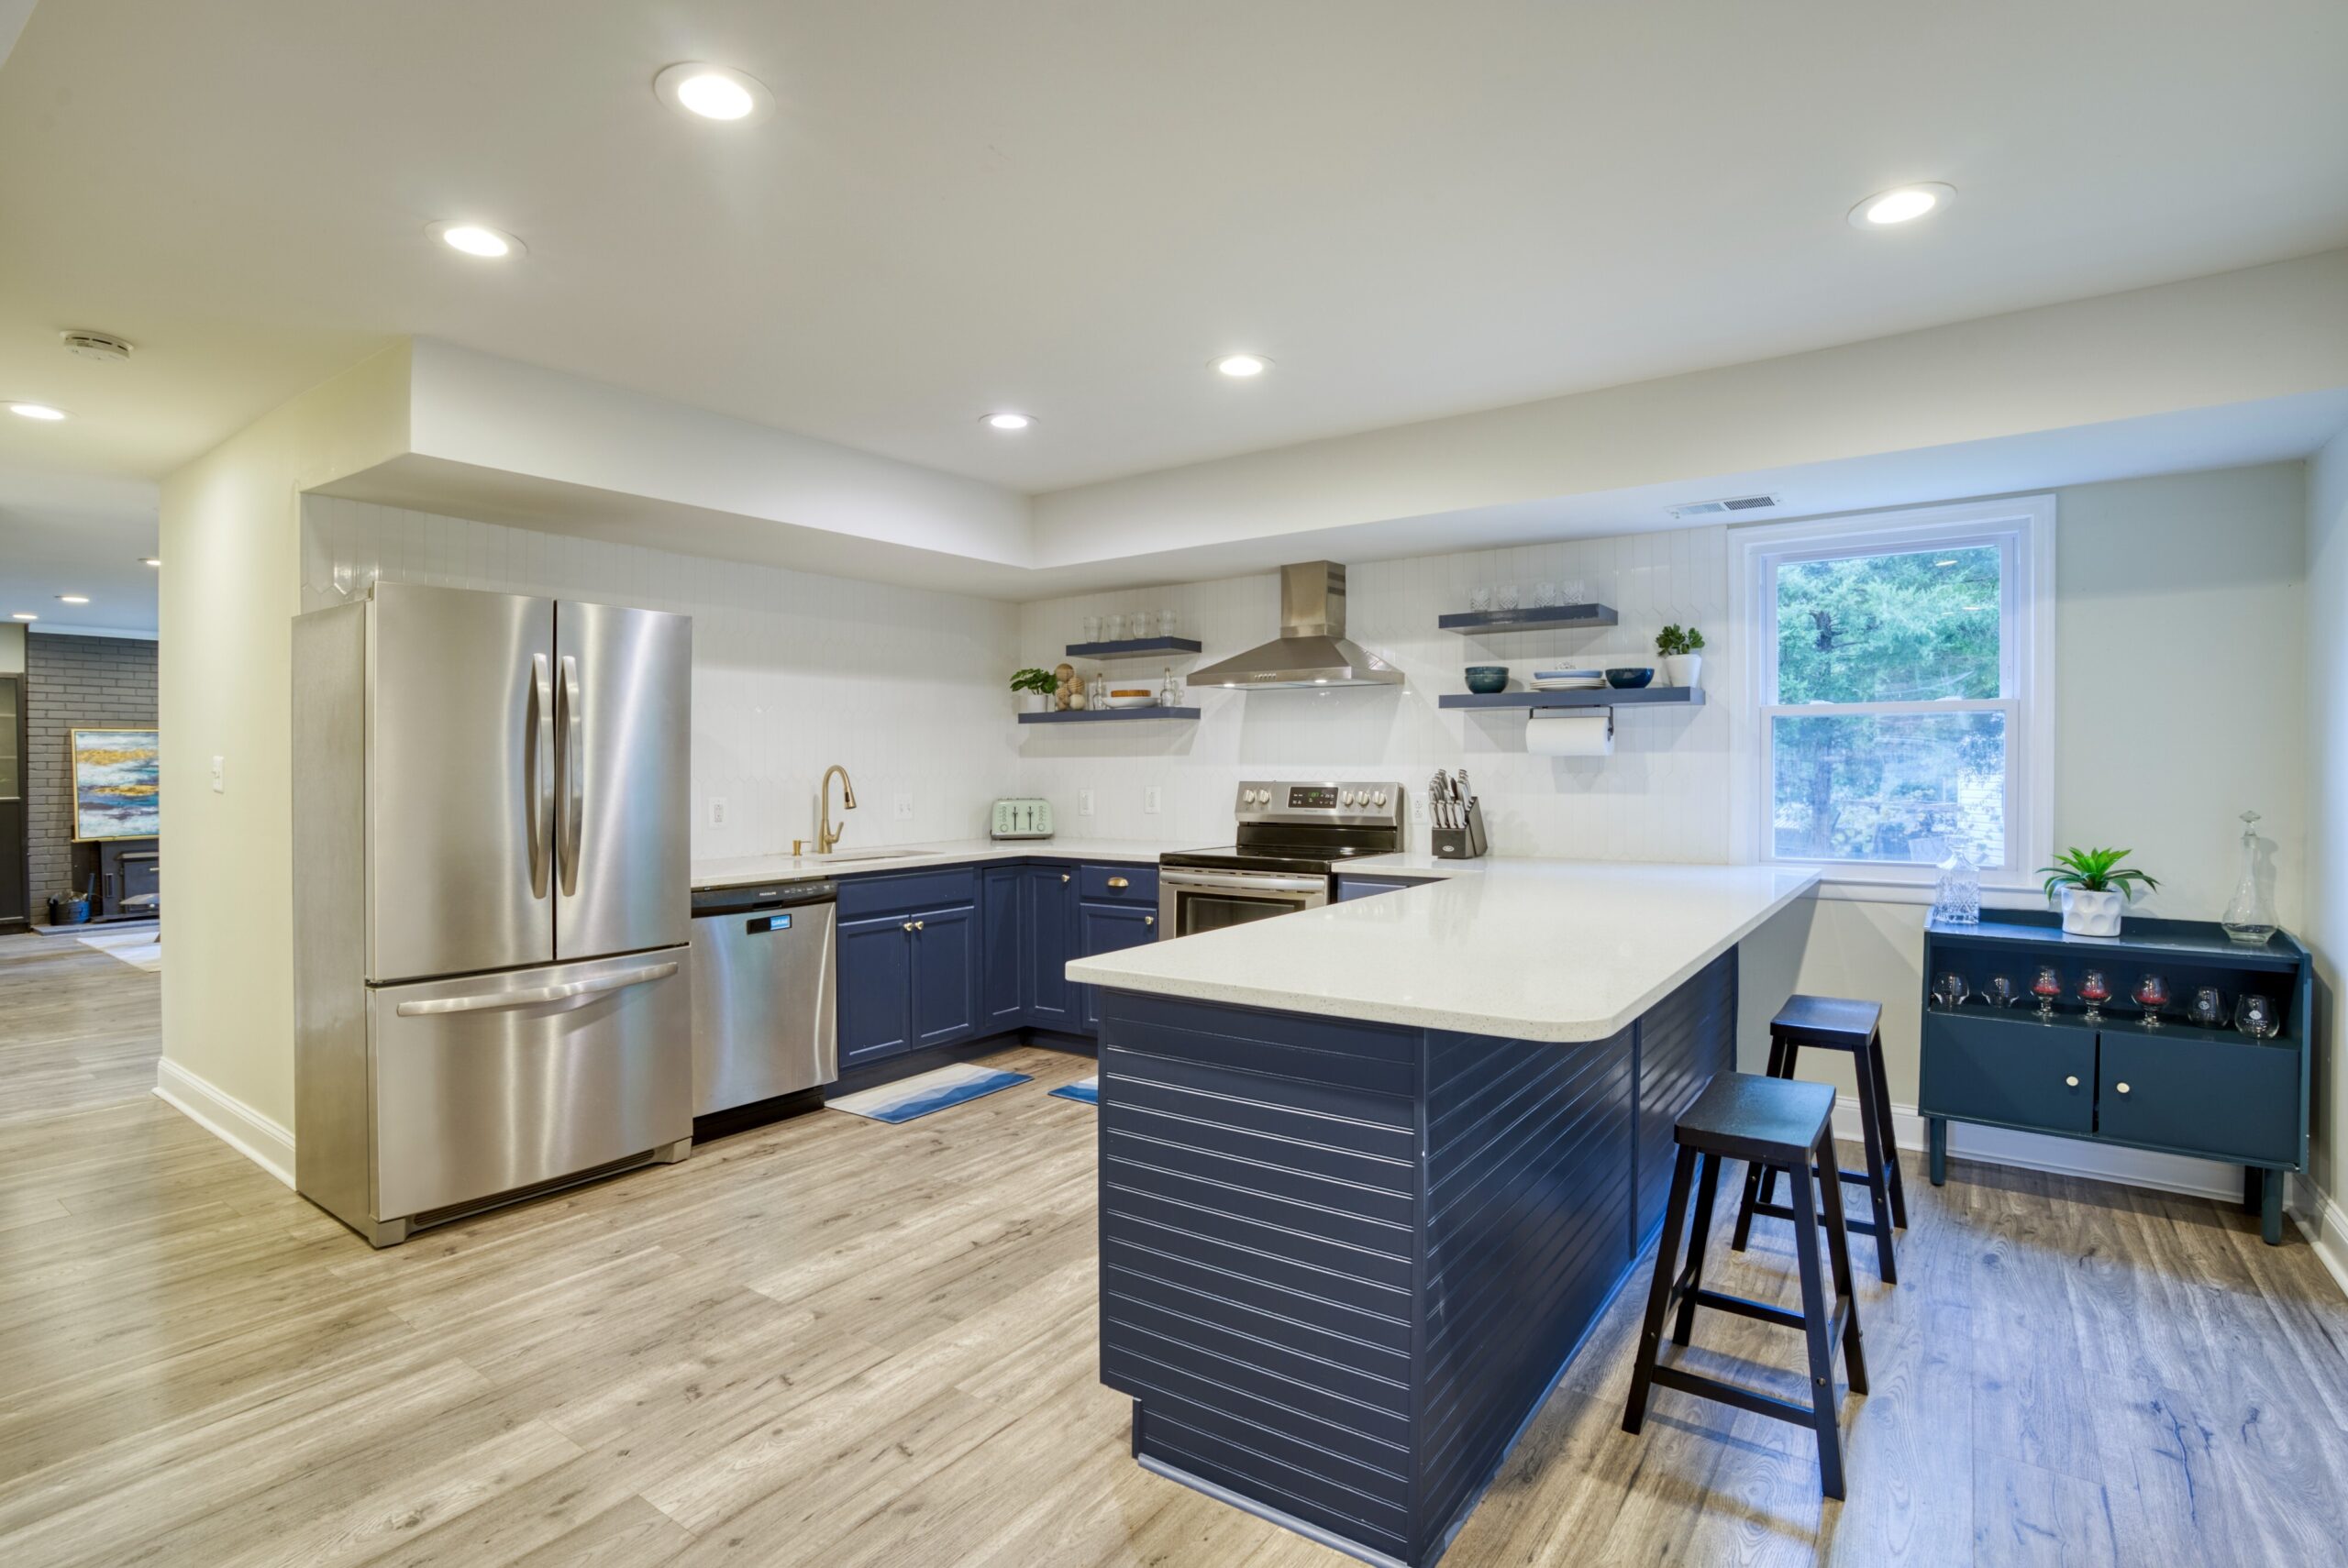 Interior professional photo of 9015 Longbow Rd - showing newly remodeled and upgraded kitchen with stainless appliances, huge quartz peninsula for dining, and navy contrast colors